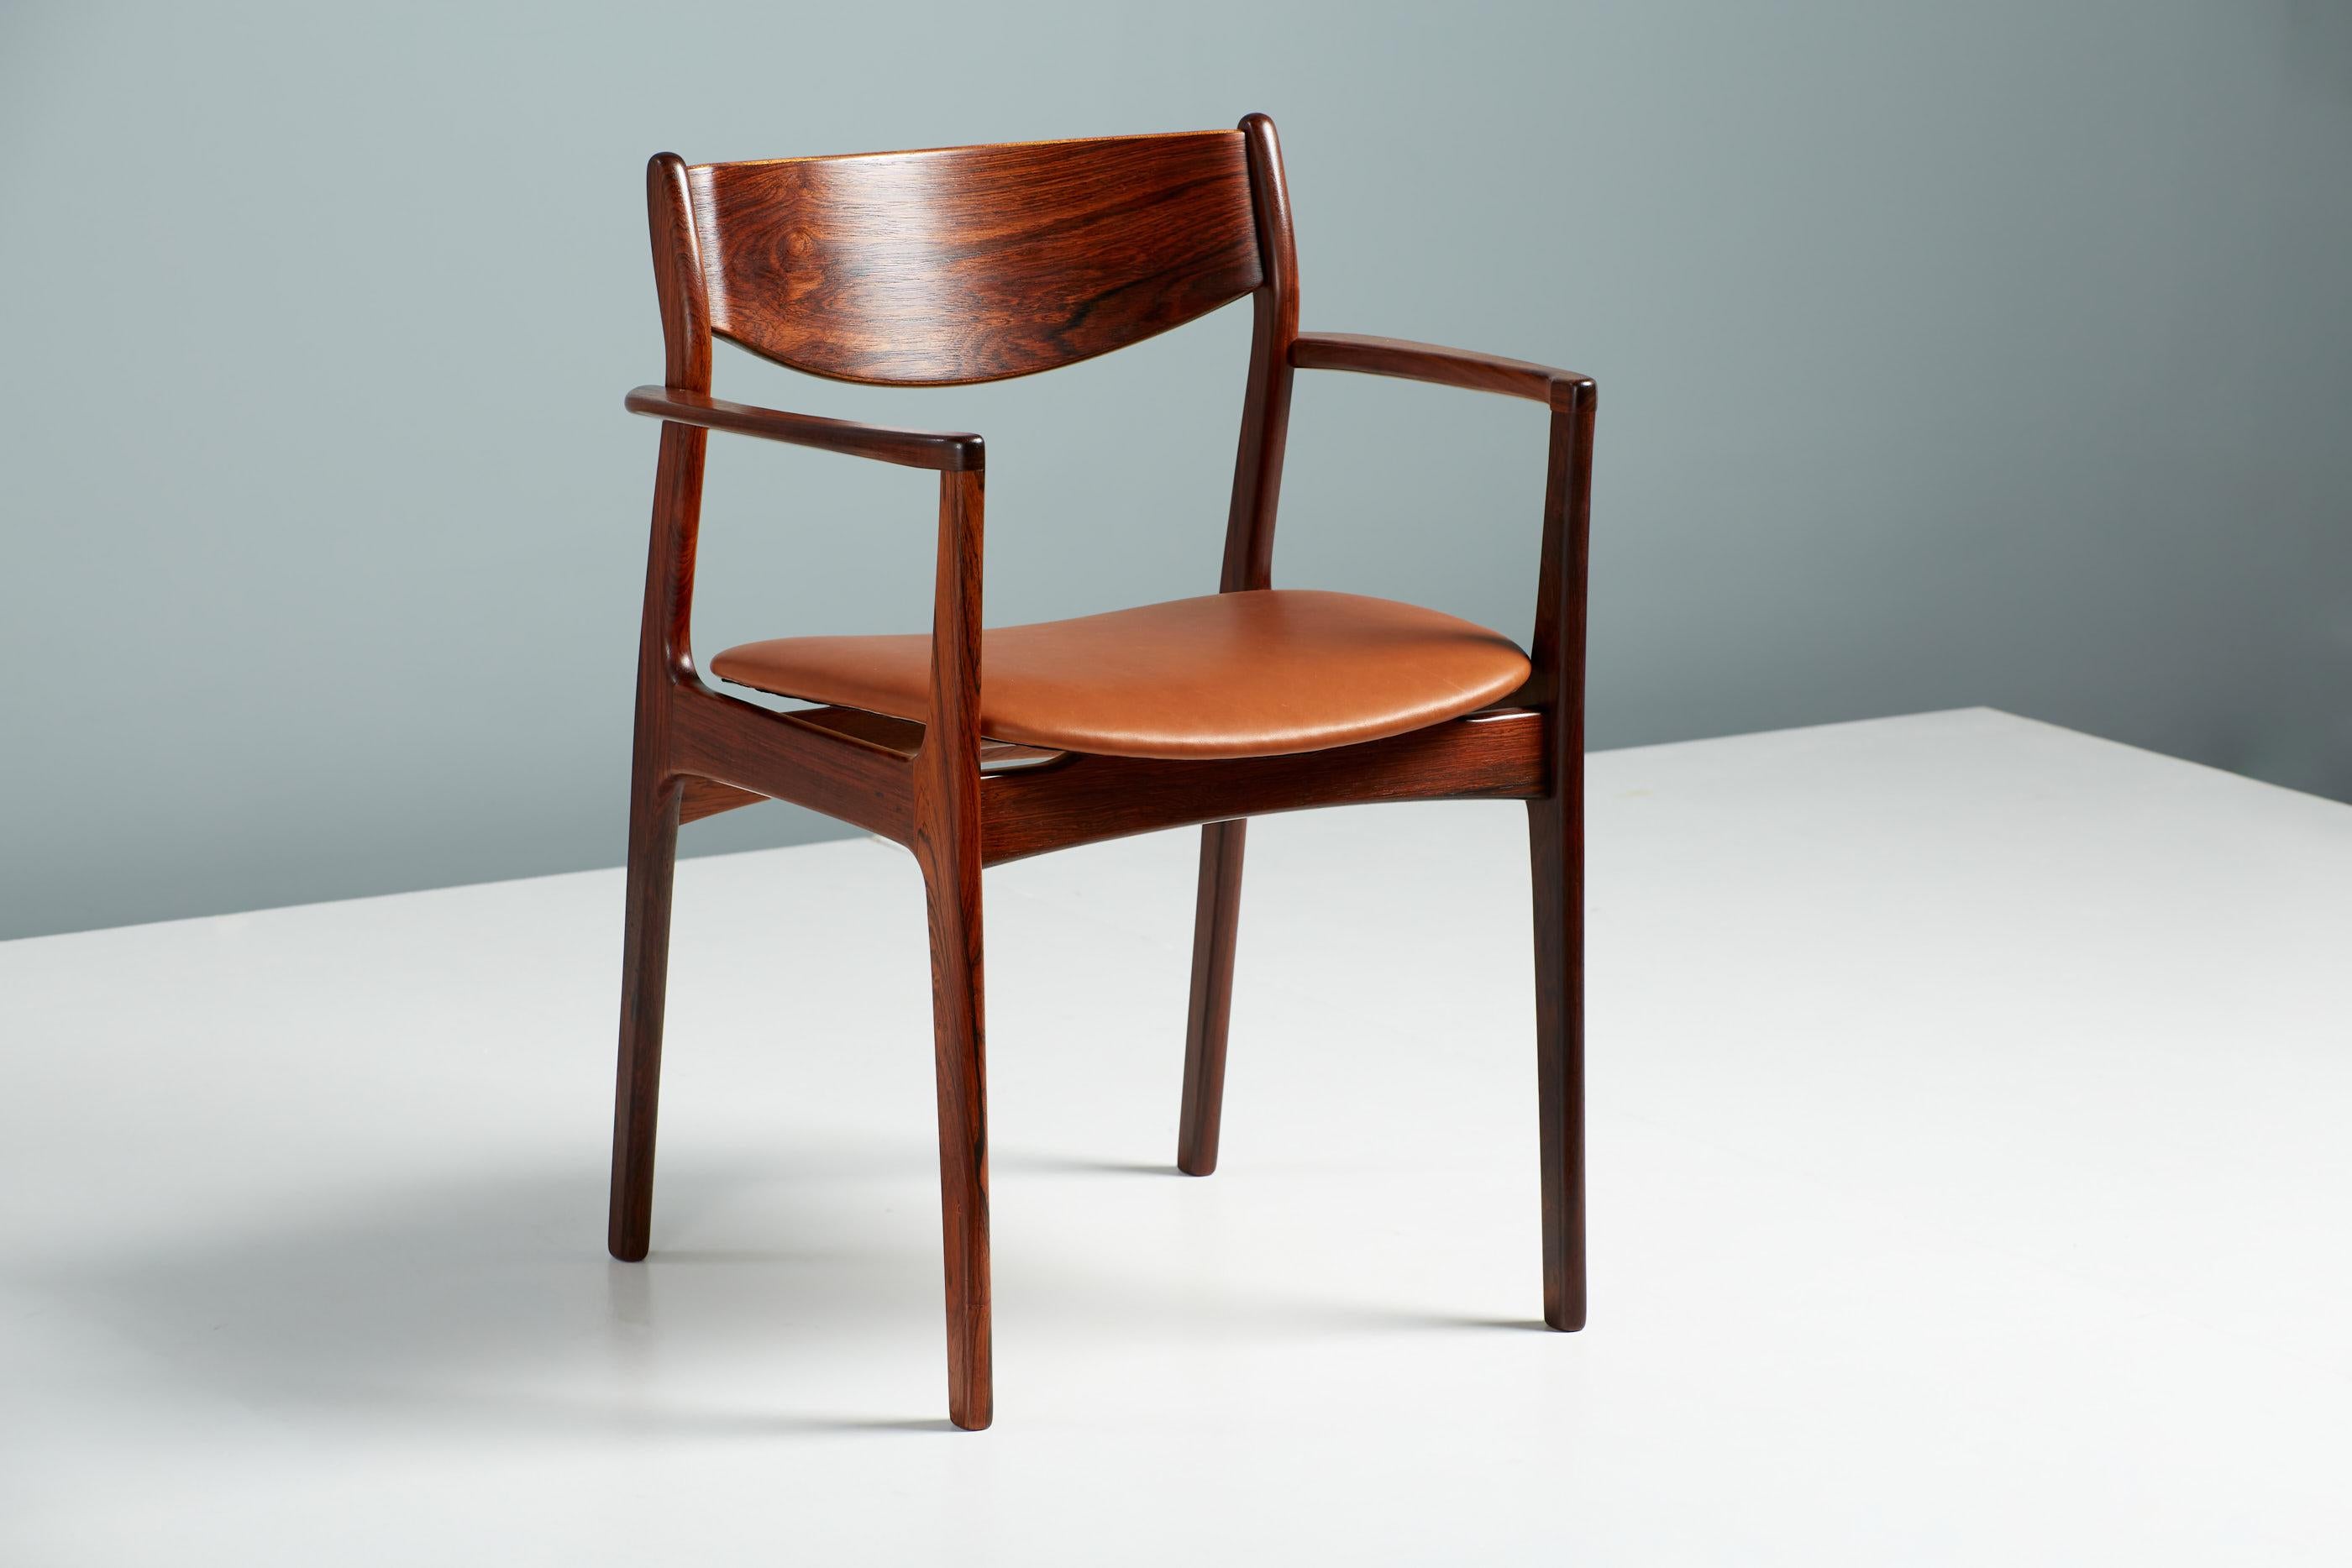 Arne Wahl Iversen 1960s Rosewood Carver Chair In Excellent Condition For Sale In London, GB